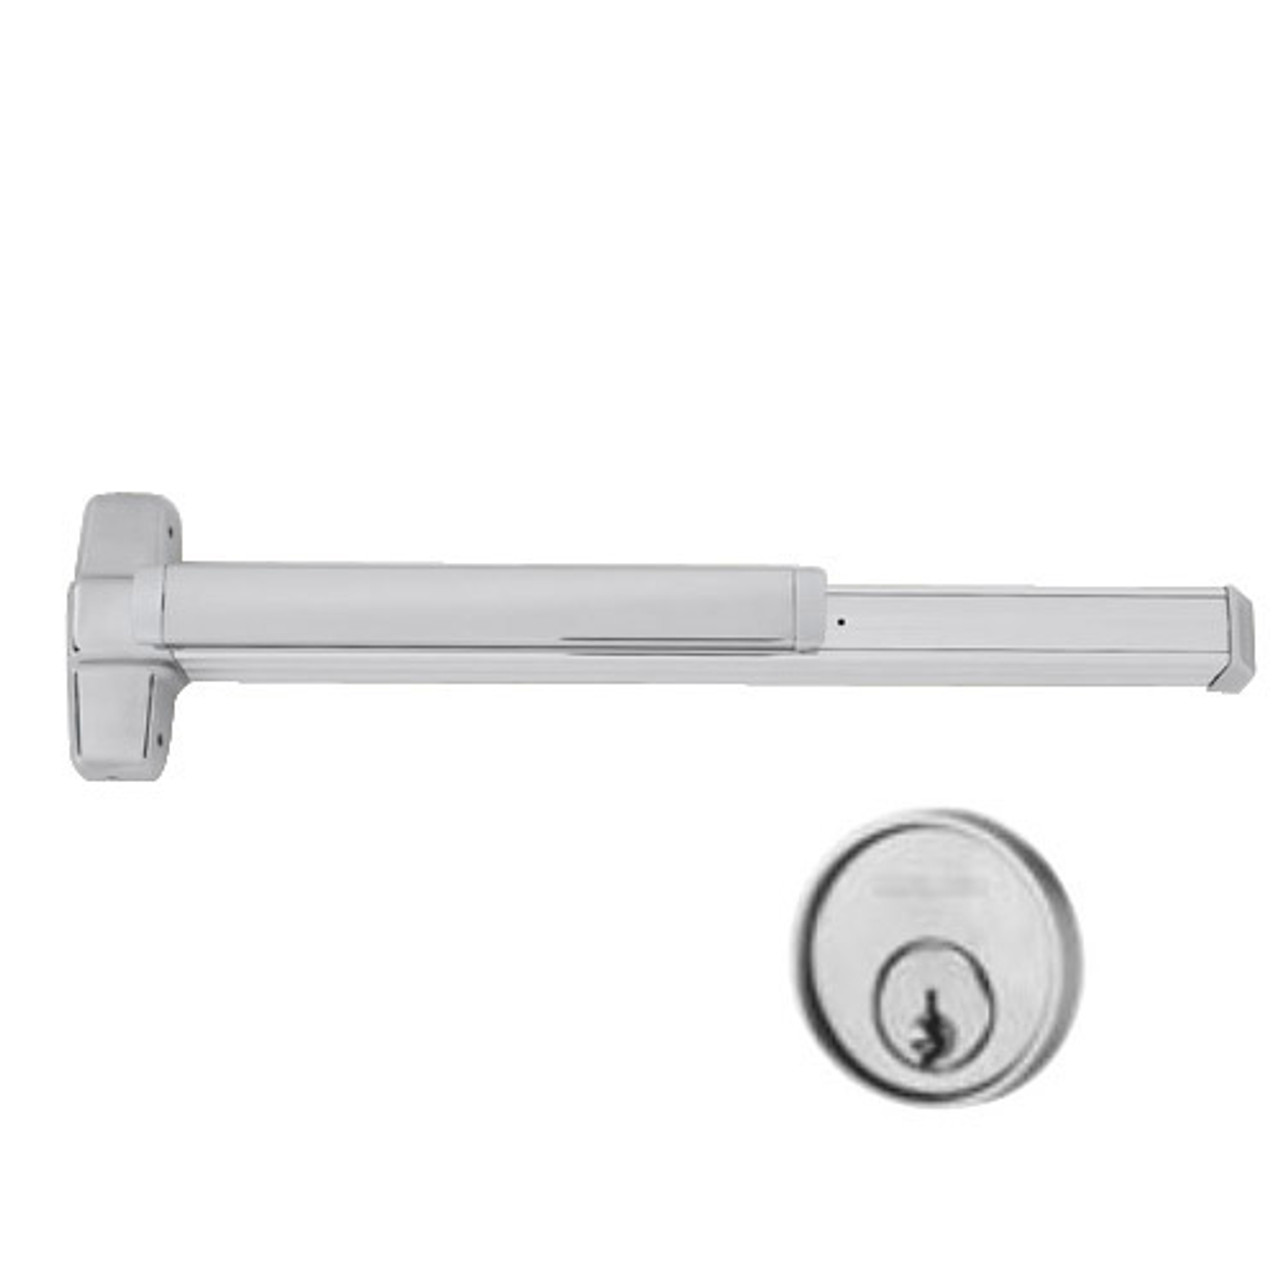 EL9847WDC-NL-OP-US32D-3 Von Duprin Exit Device with Electric Latch Retraction in Satin Stainless